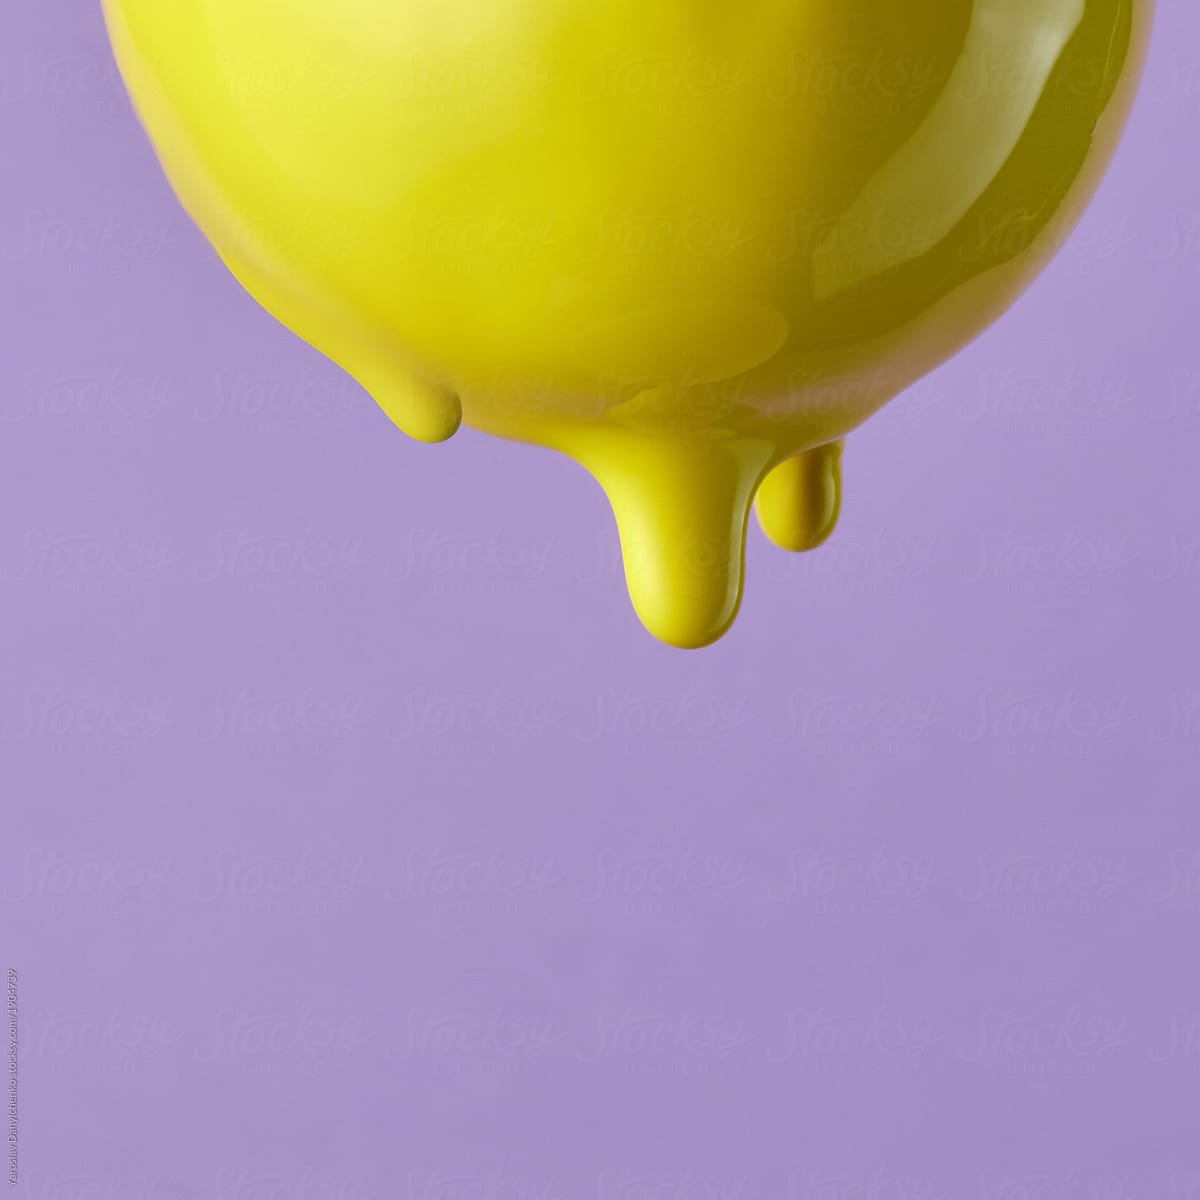 Close-up of a drop of yellow paint dripping from a pear on a purple background